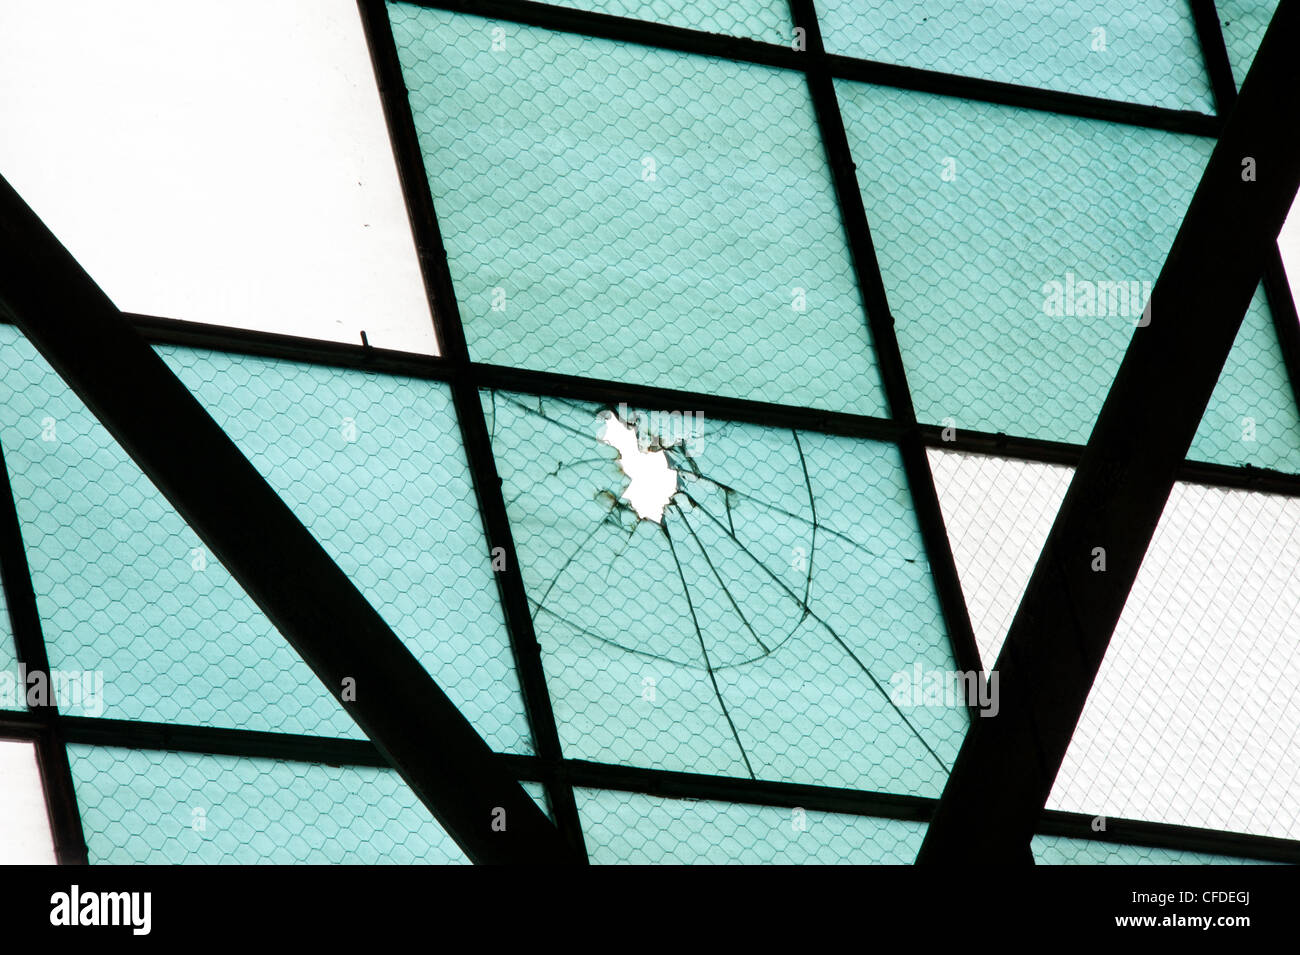 Bullet hole in the windows of an airplane hanger from the Japanese attack on Pearl Harbor. Stock Photo